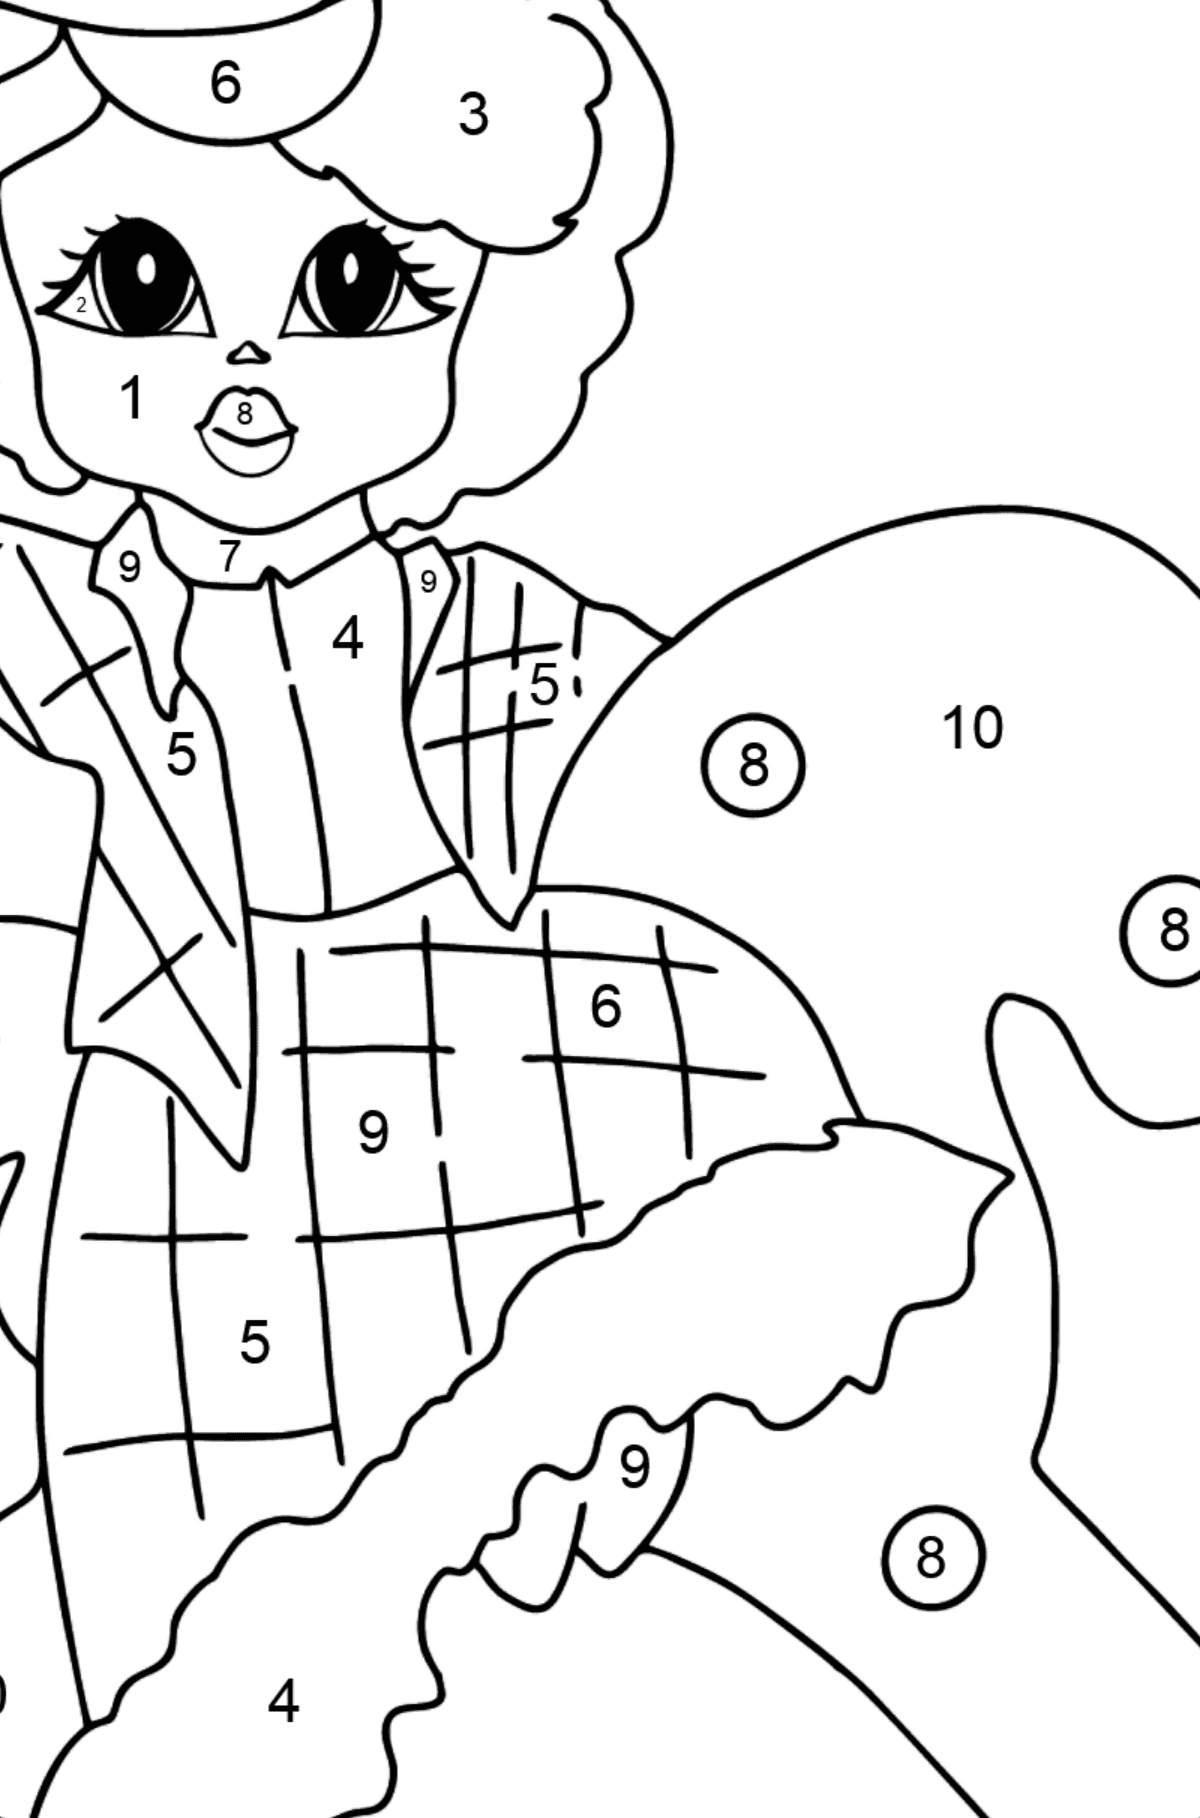 Coloring Page - A Princess on a Horse - Coloring by Numbers for Kids